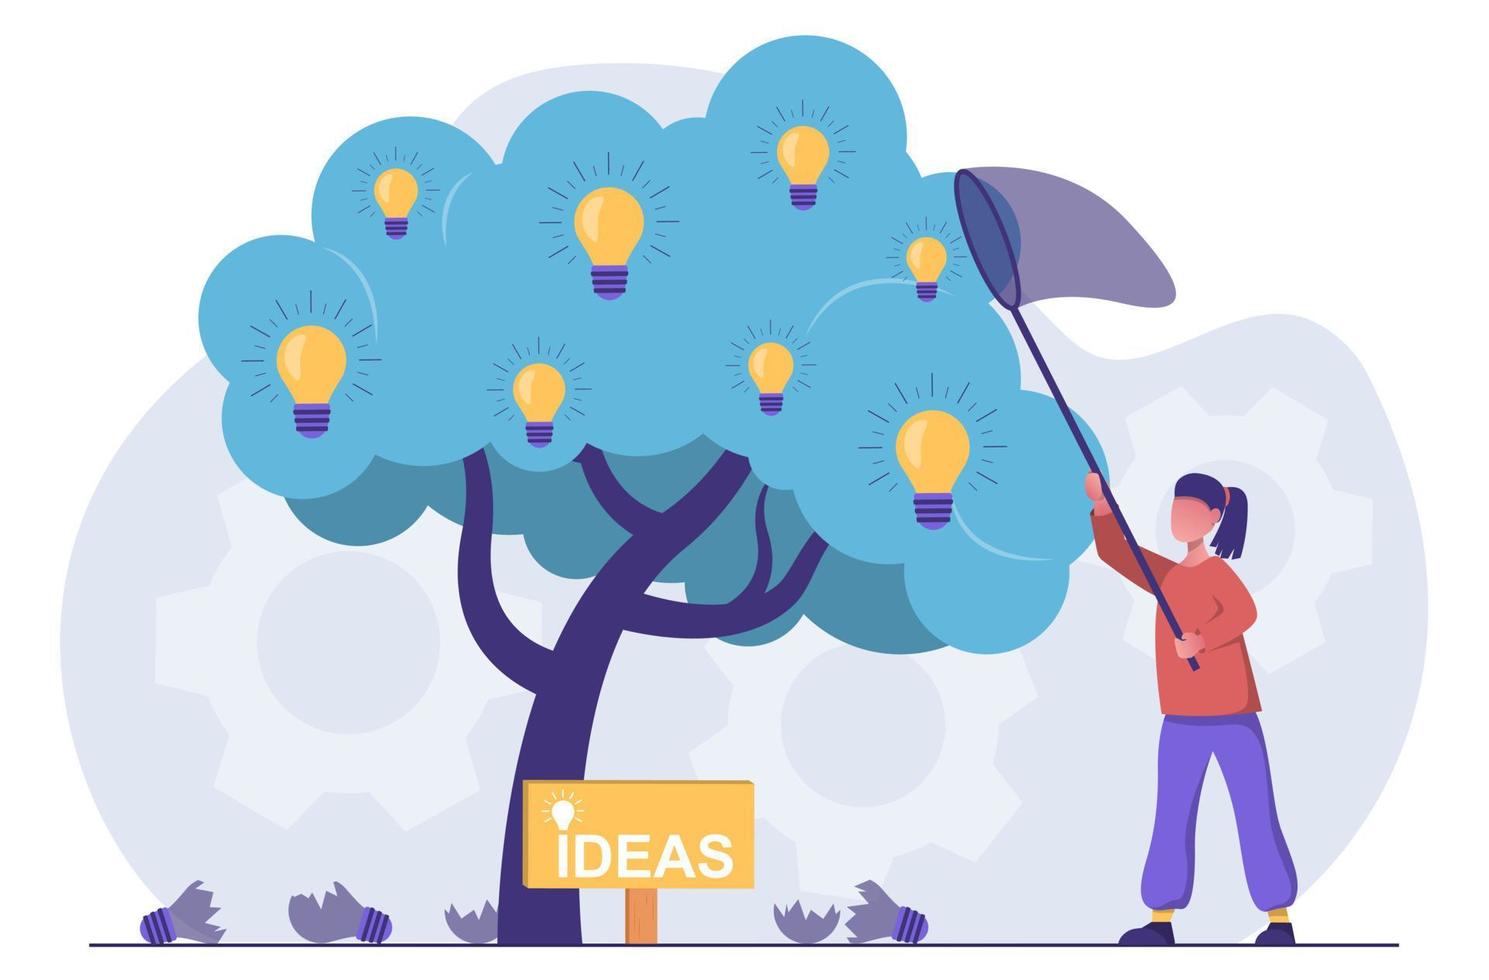 Finding ideas. A woman tries to rip a light bulb from a tree of ideas vector